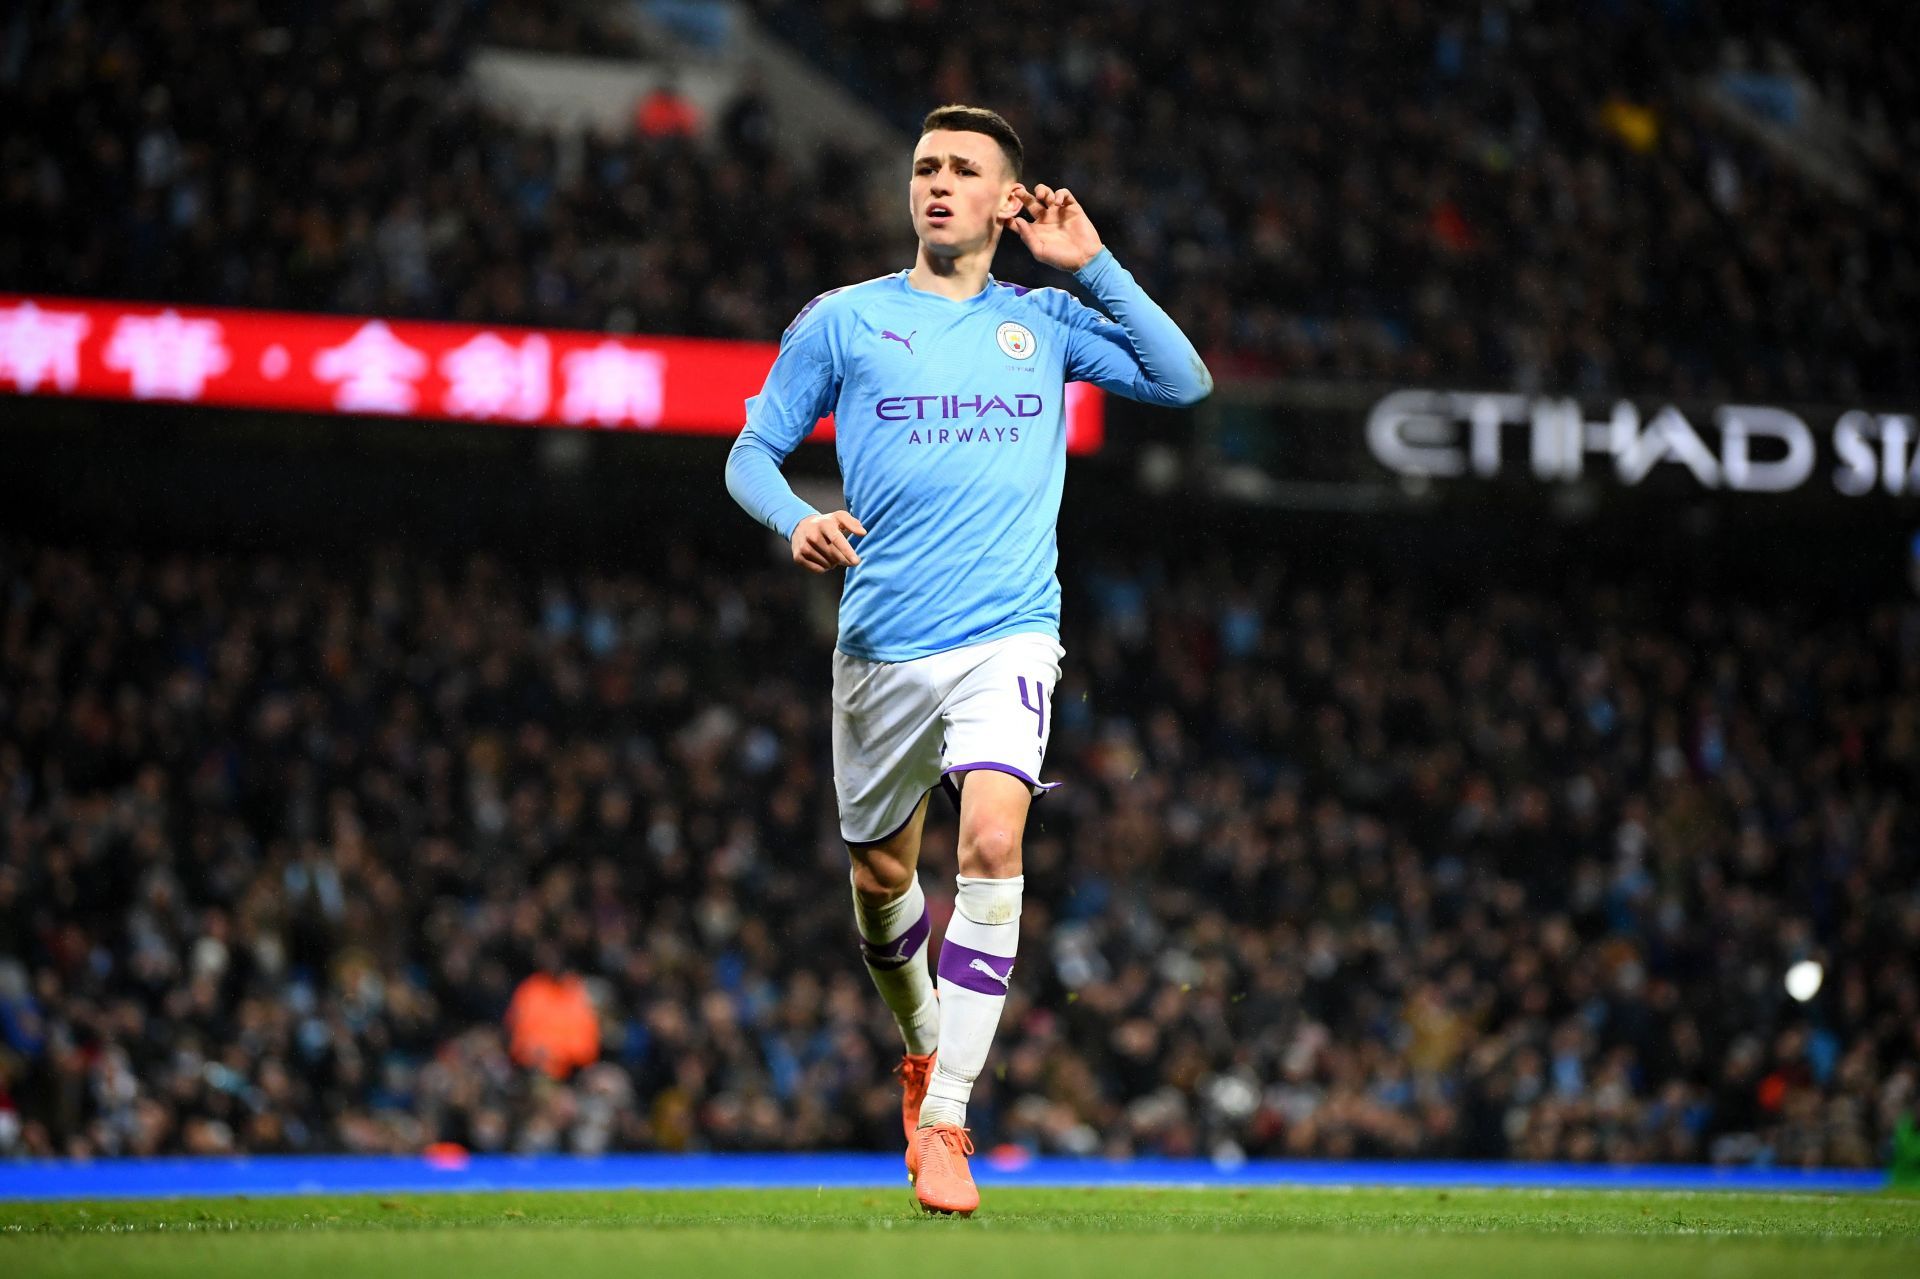 Phil Foden is among the most promising players in Europe